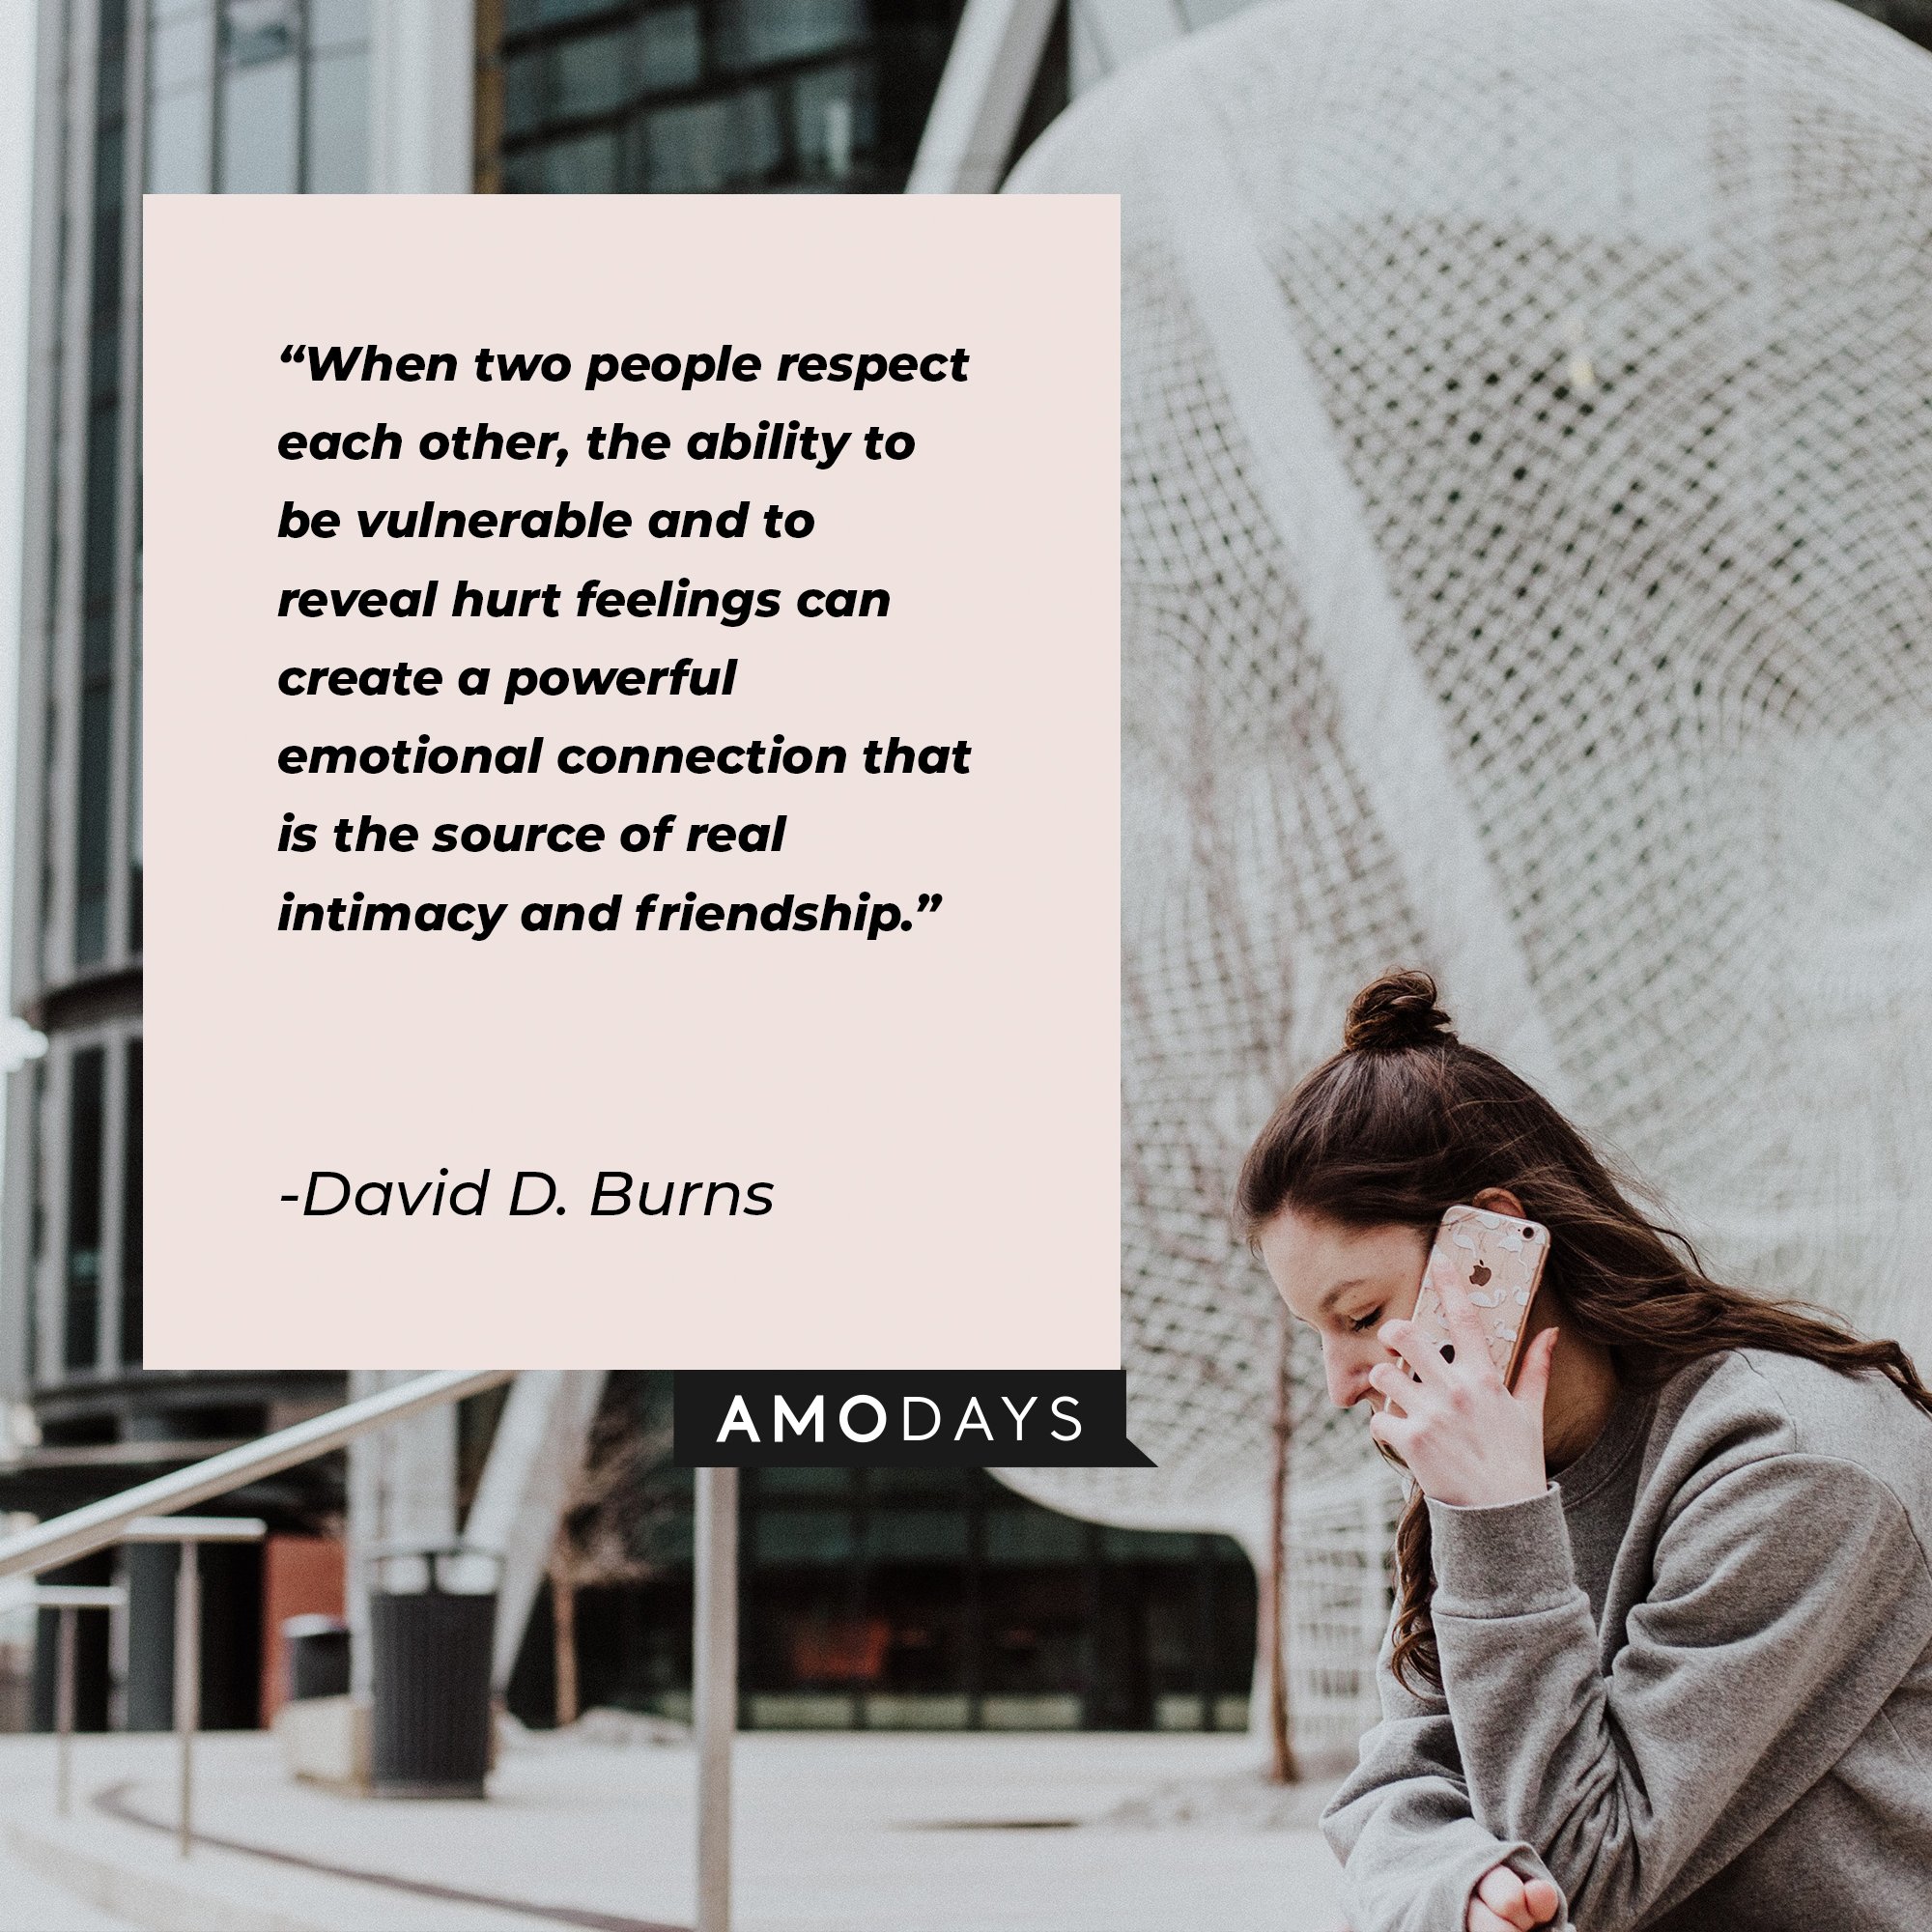 David D. Burns' quote: “When two people respect each other, the ability to be vulnerable and to reveal hurt feelings can create a powerful emotional connection that is the source of real intimacy and friendship.” | Image: AmoDays